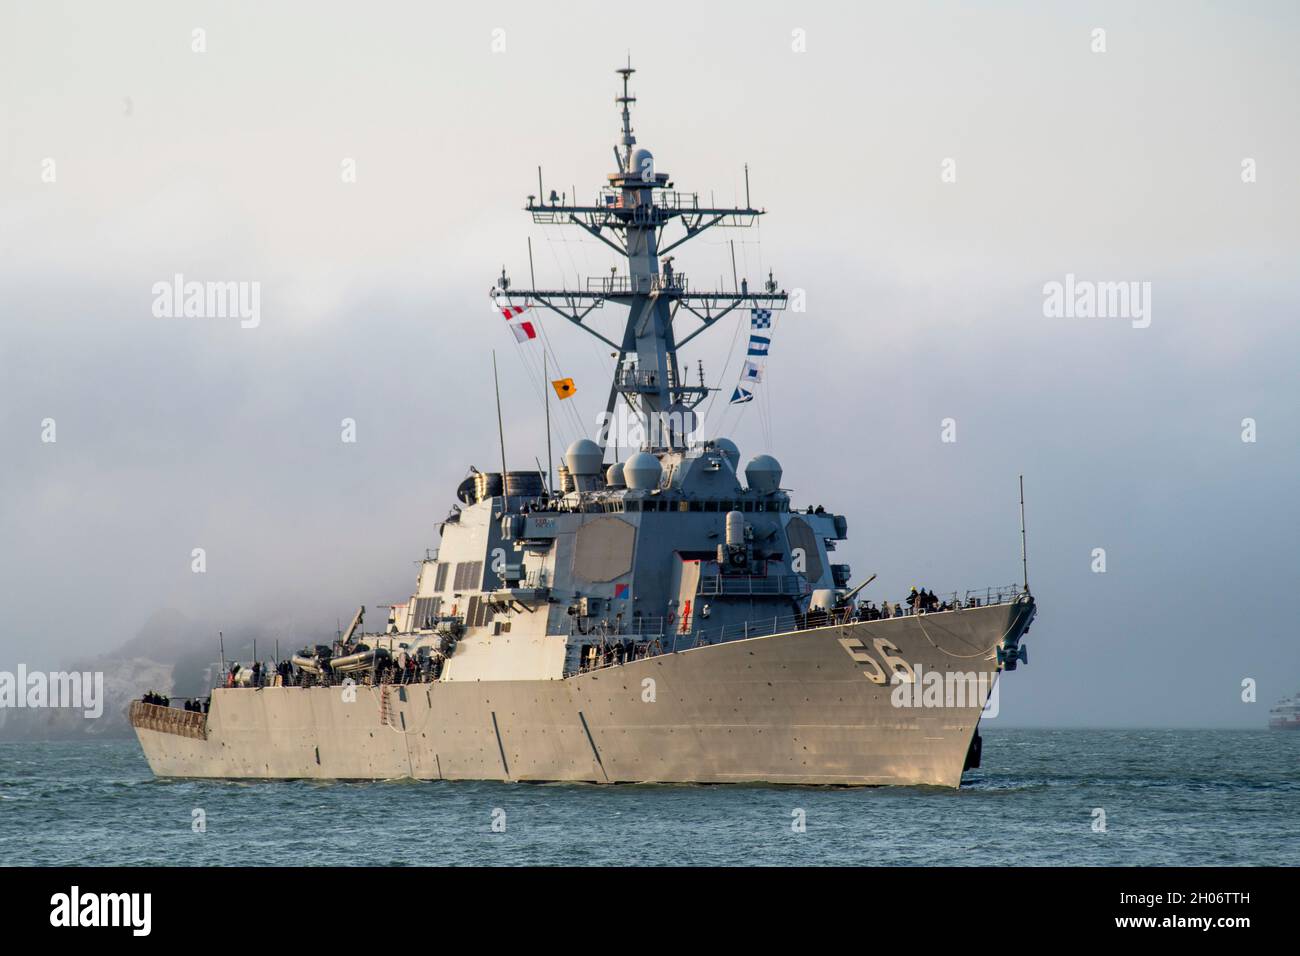 San Francisco, United States. 04 October, 2021. The U.S. Navy Arleigh Burke-class guided-missile destroyer USS John S. McCain, moored in the foggy San Francisco harbor during San Francisco Fleet Week 2021 October 4, 2021 in San Francisco, California.  Credit: MC2 Hector Carrera/U.S. Navy/Alamy Live News Stock Photo